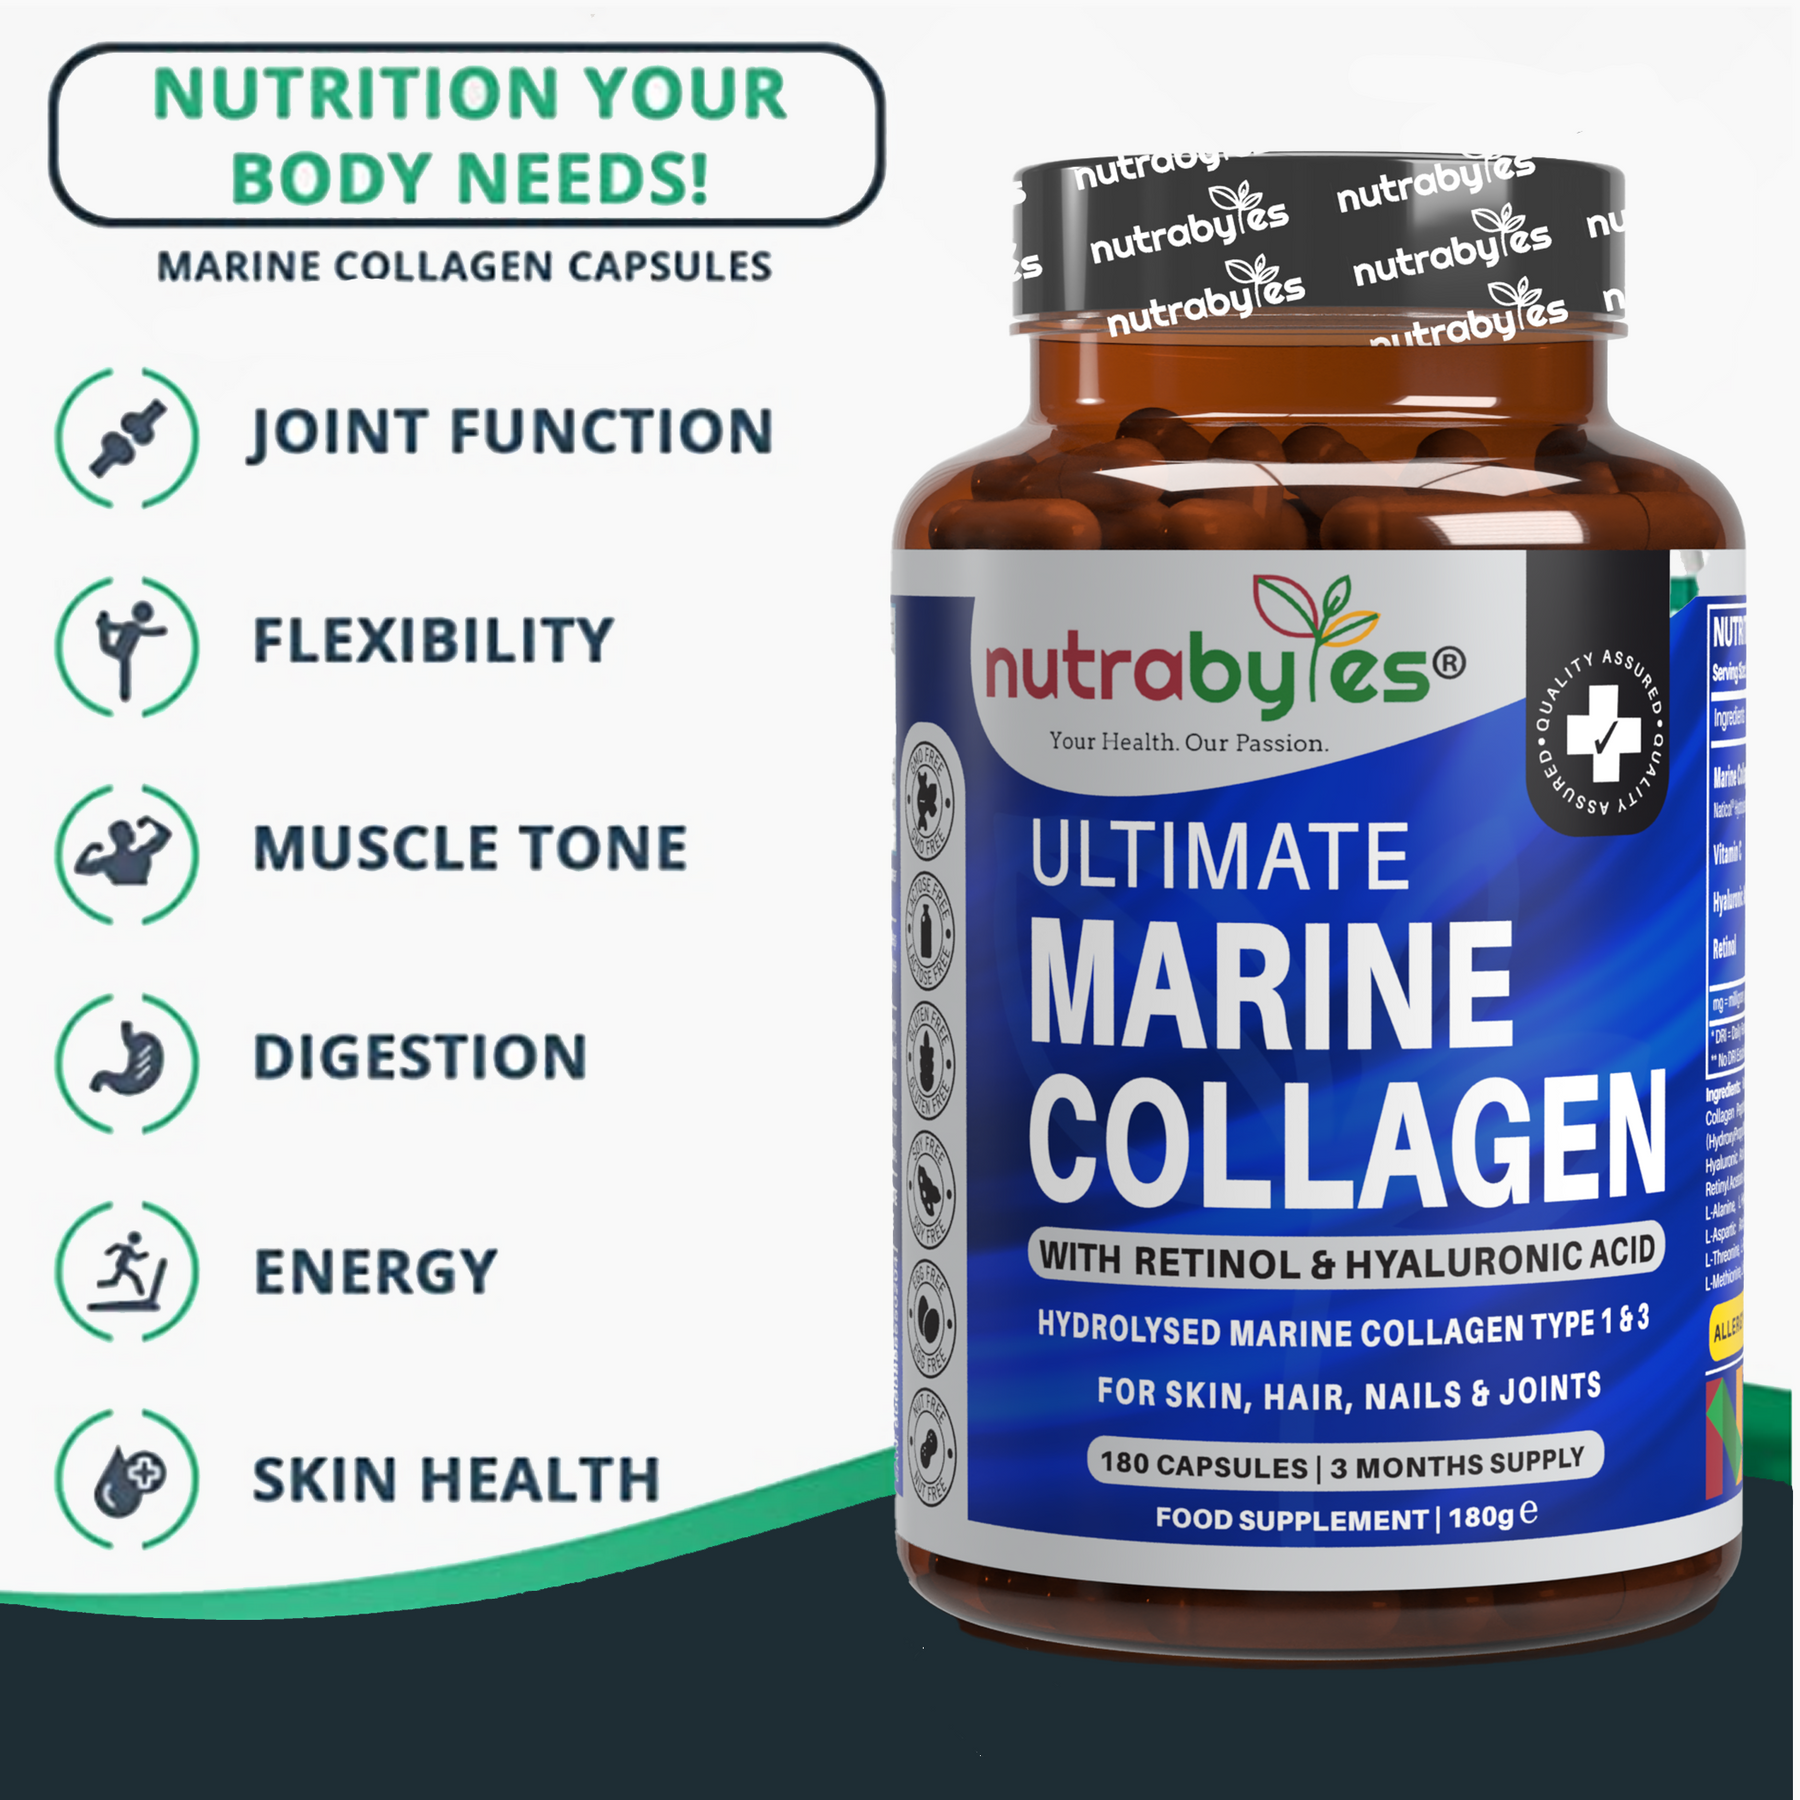 Ultimate Marine Collagen Supplement with Retinol, Hyaluronic Acid & Vitamin C | 180 Capsules - 3 Months Supply | Collagen Type 1 & 3 | Made in UK